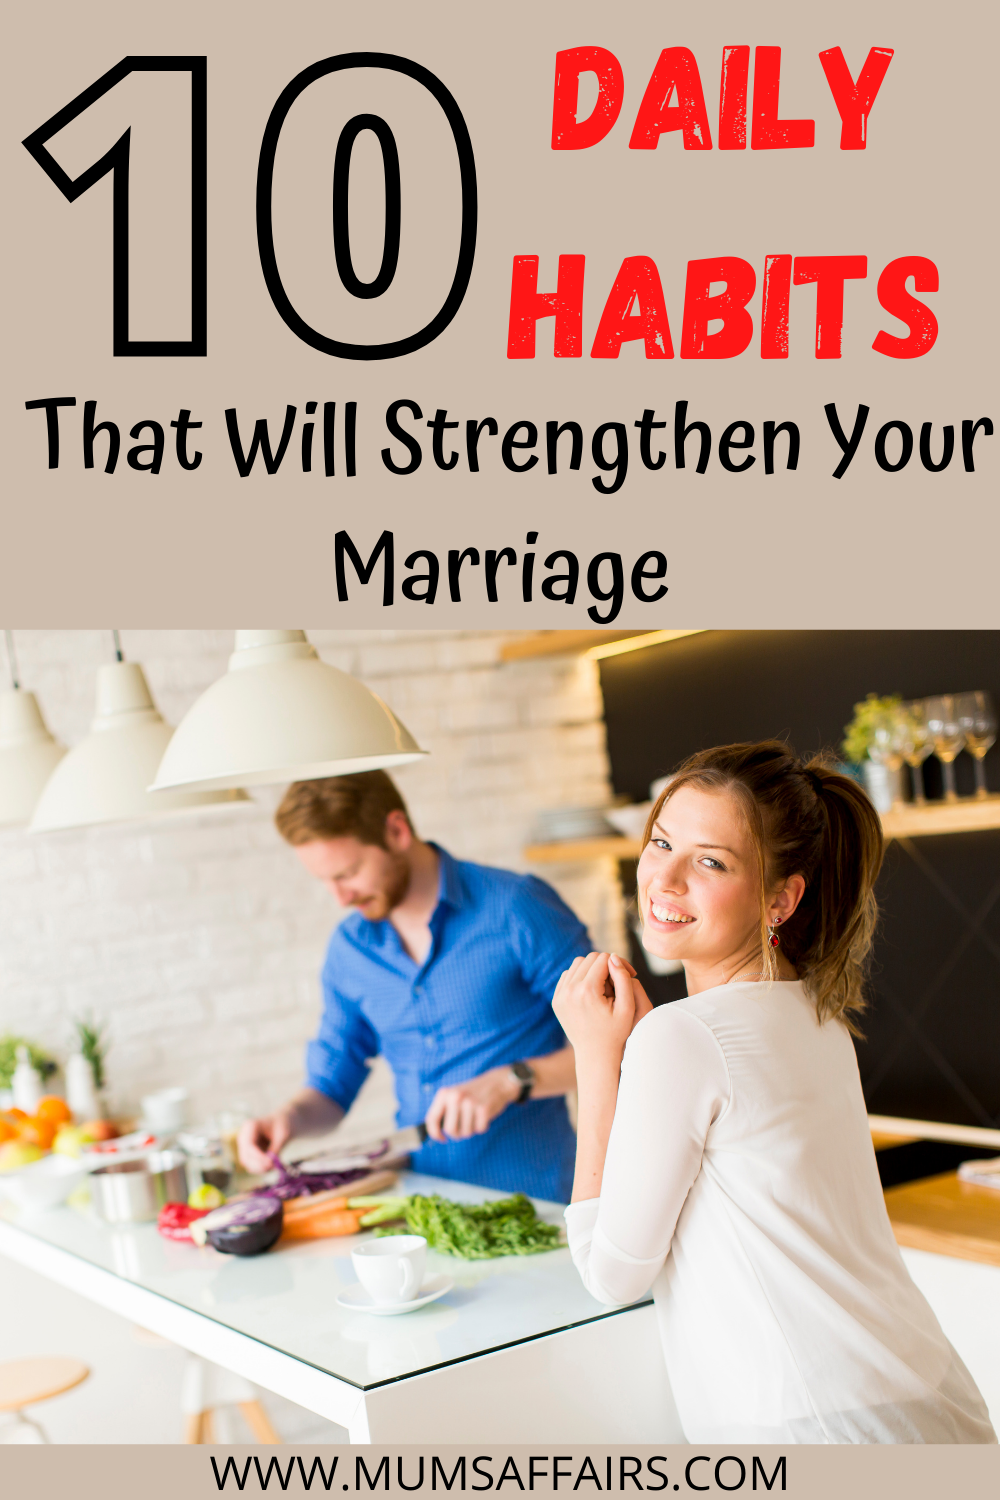 daily habits to Strengthen Your Marriage